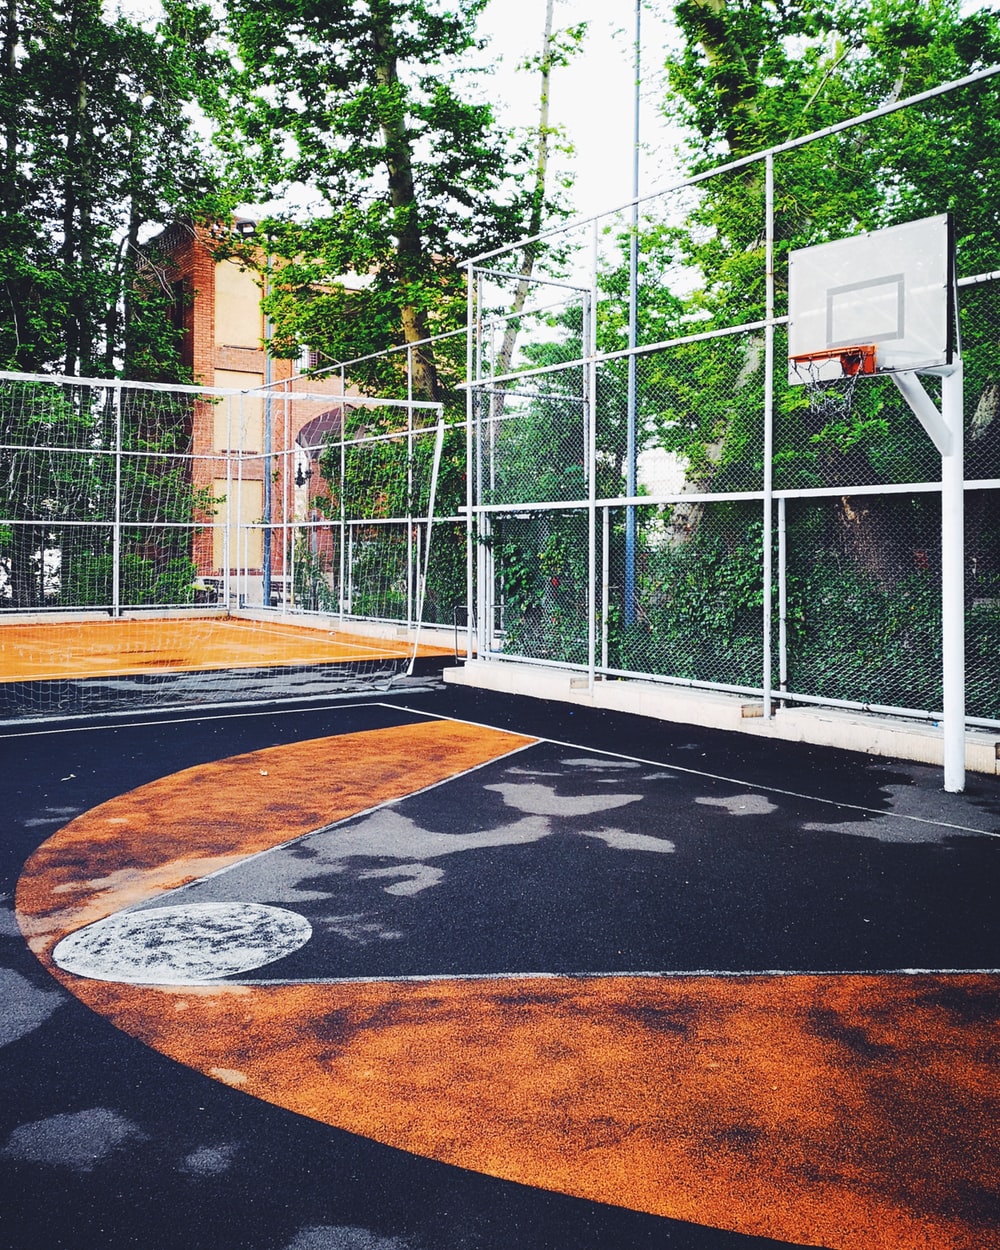 Basketball Court Pictures Image